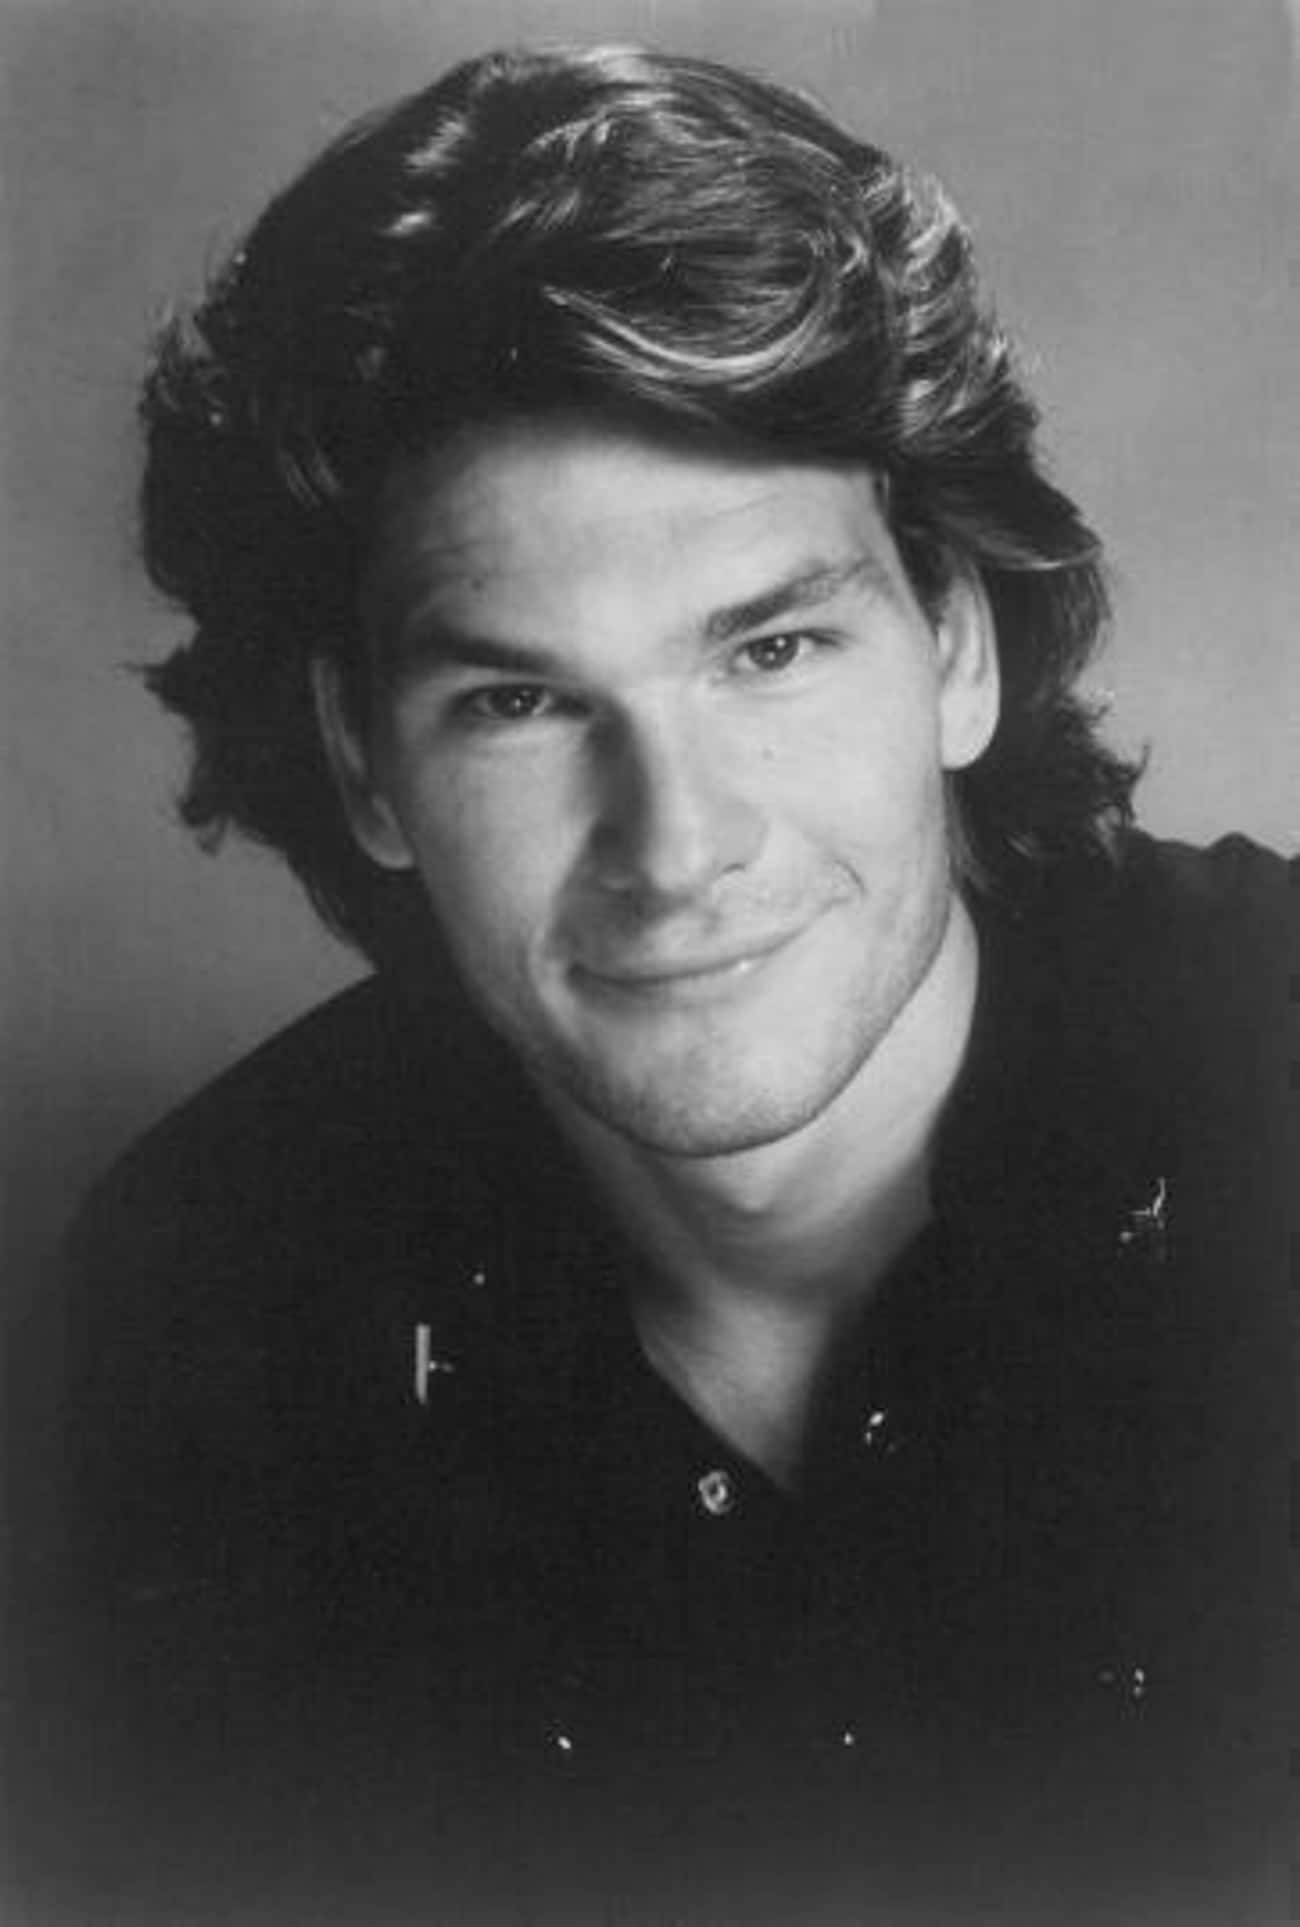 Young Patrick Swayze in Black Buttondown